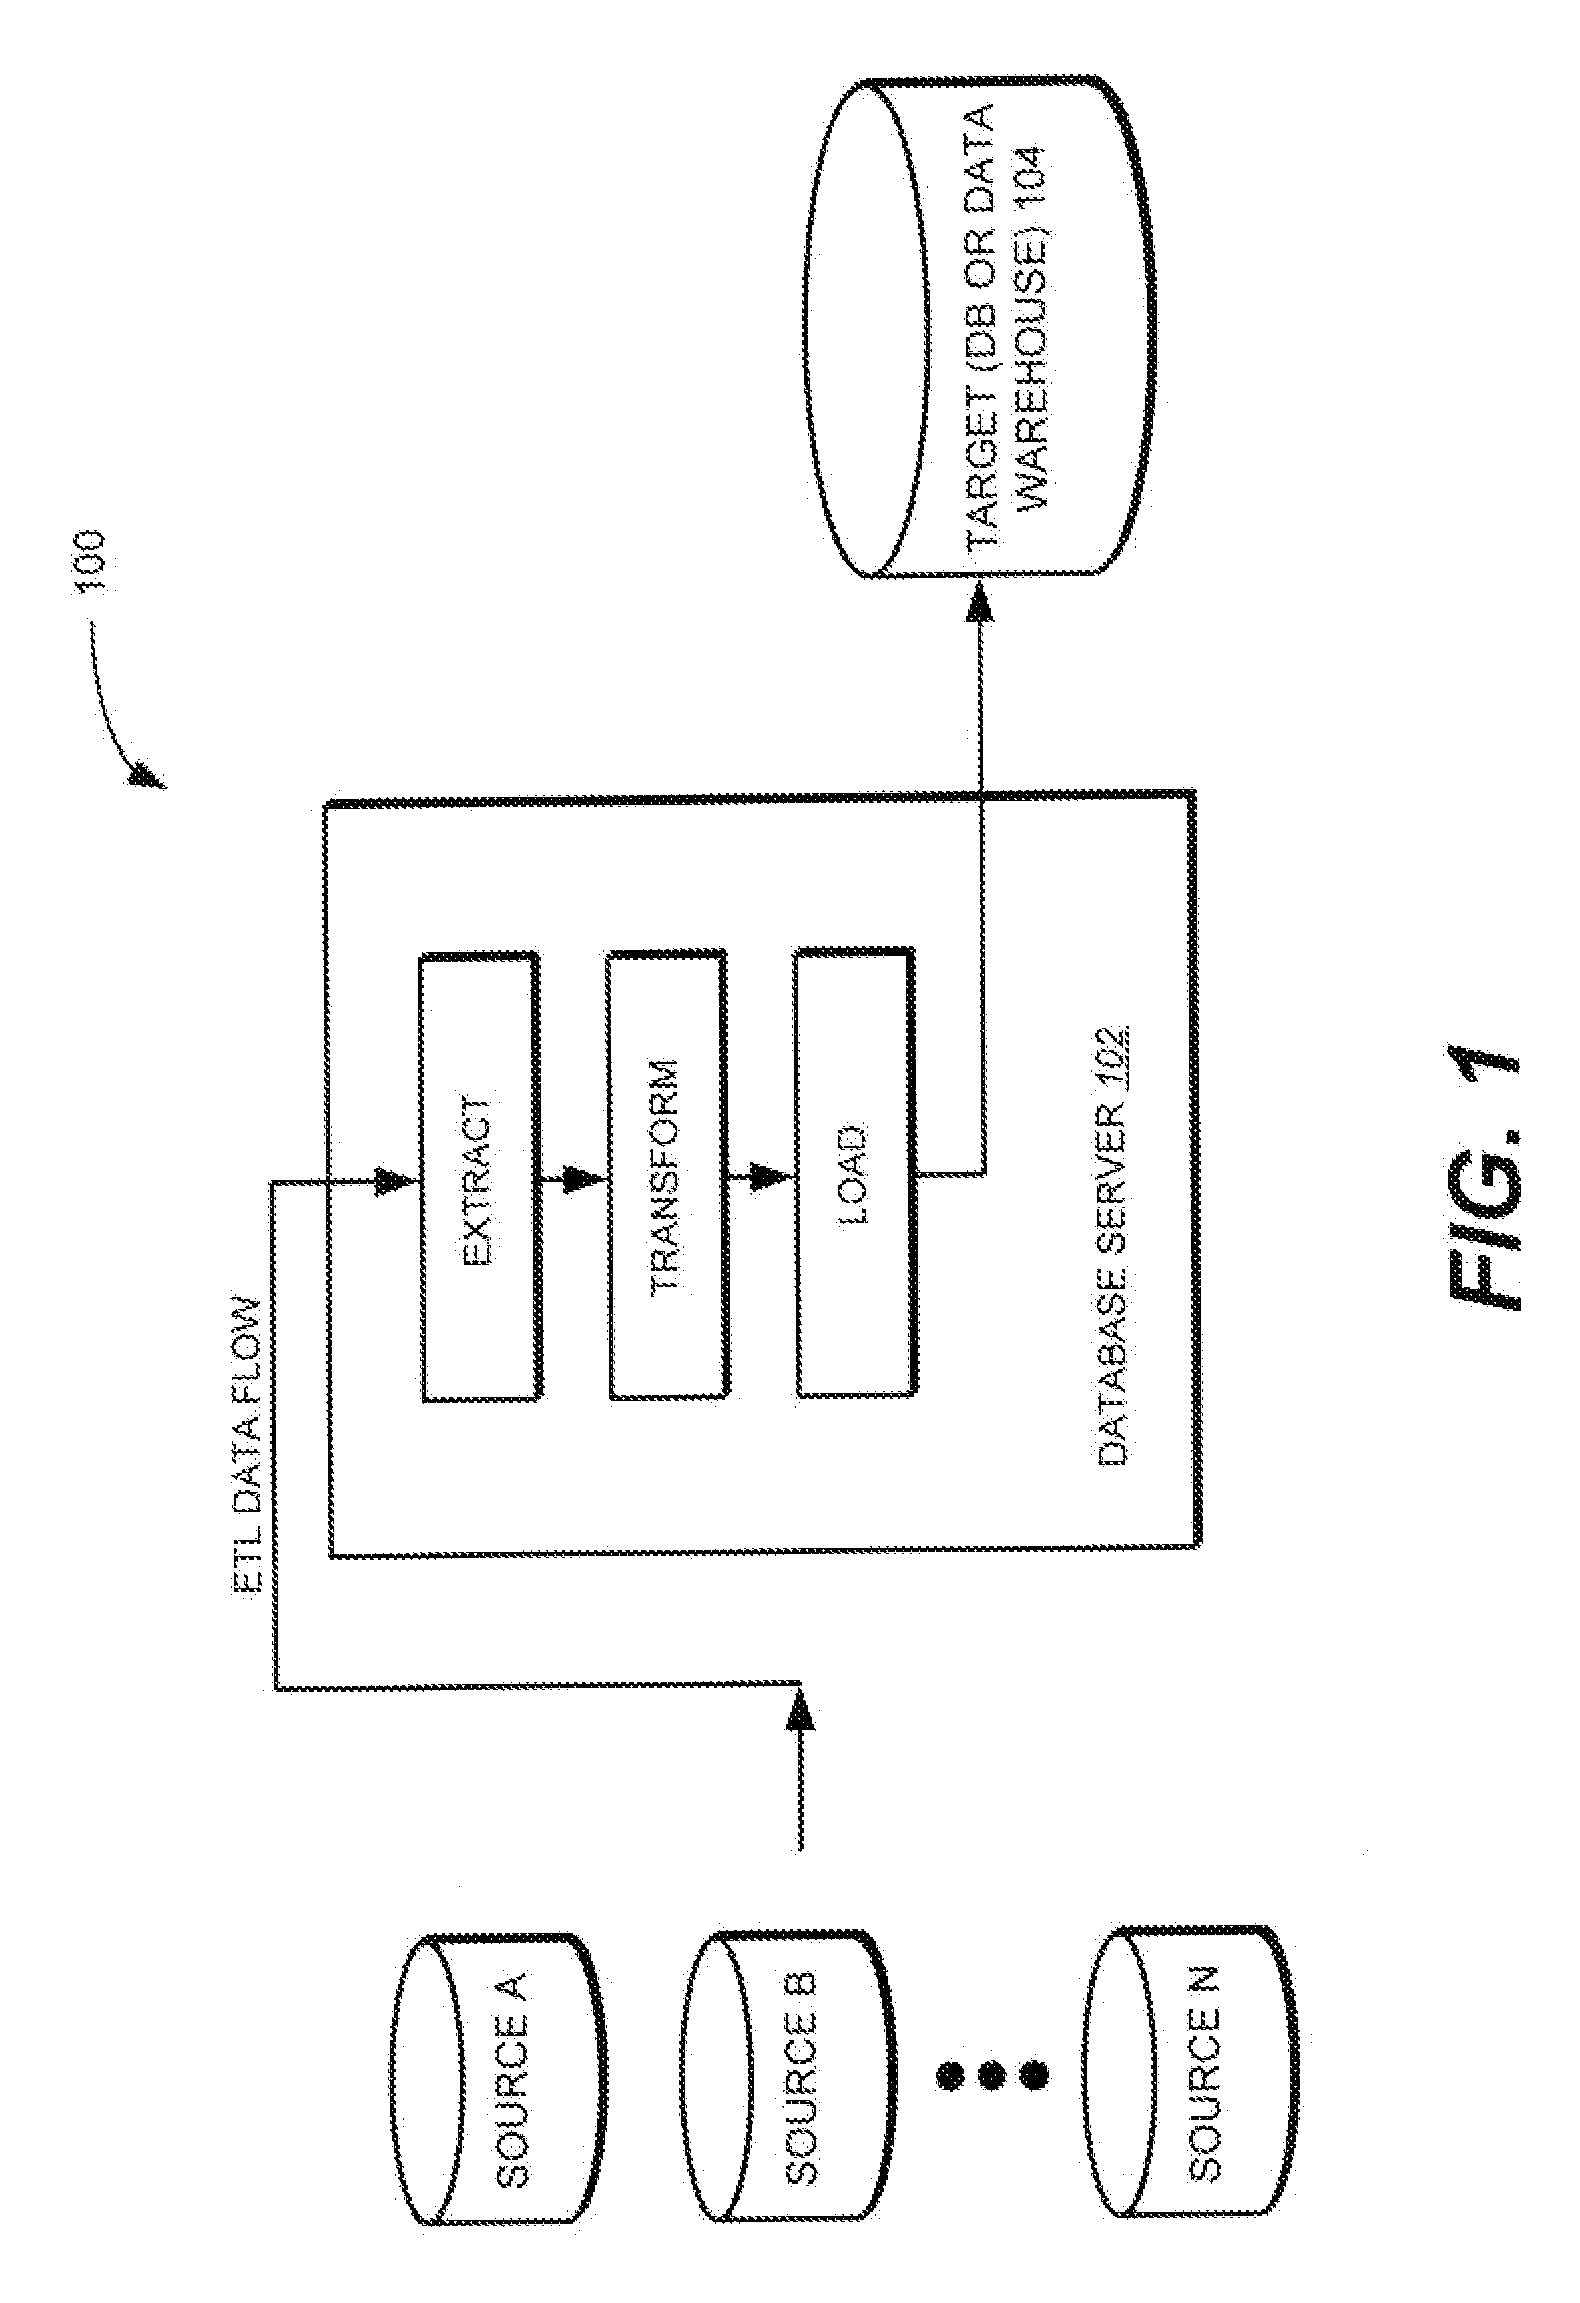 Method and apparatus for modelling data exchange in a data flow of an extract, transform, and load (ETL) process